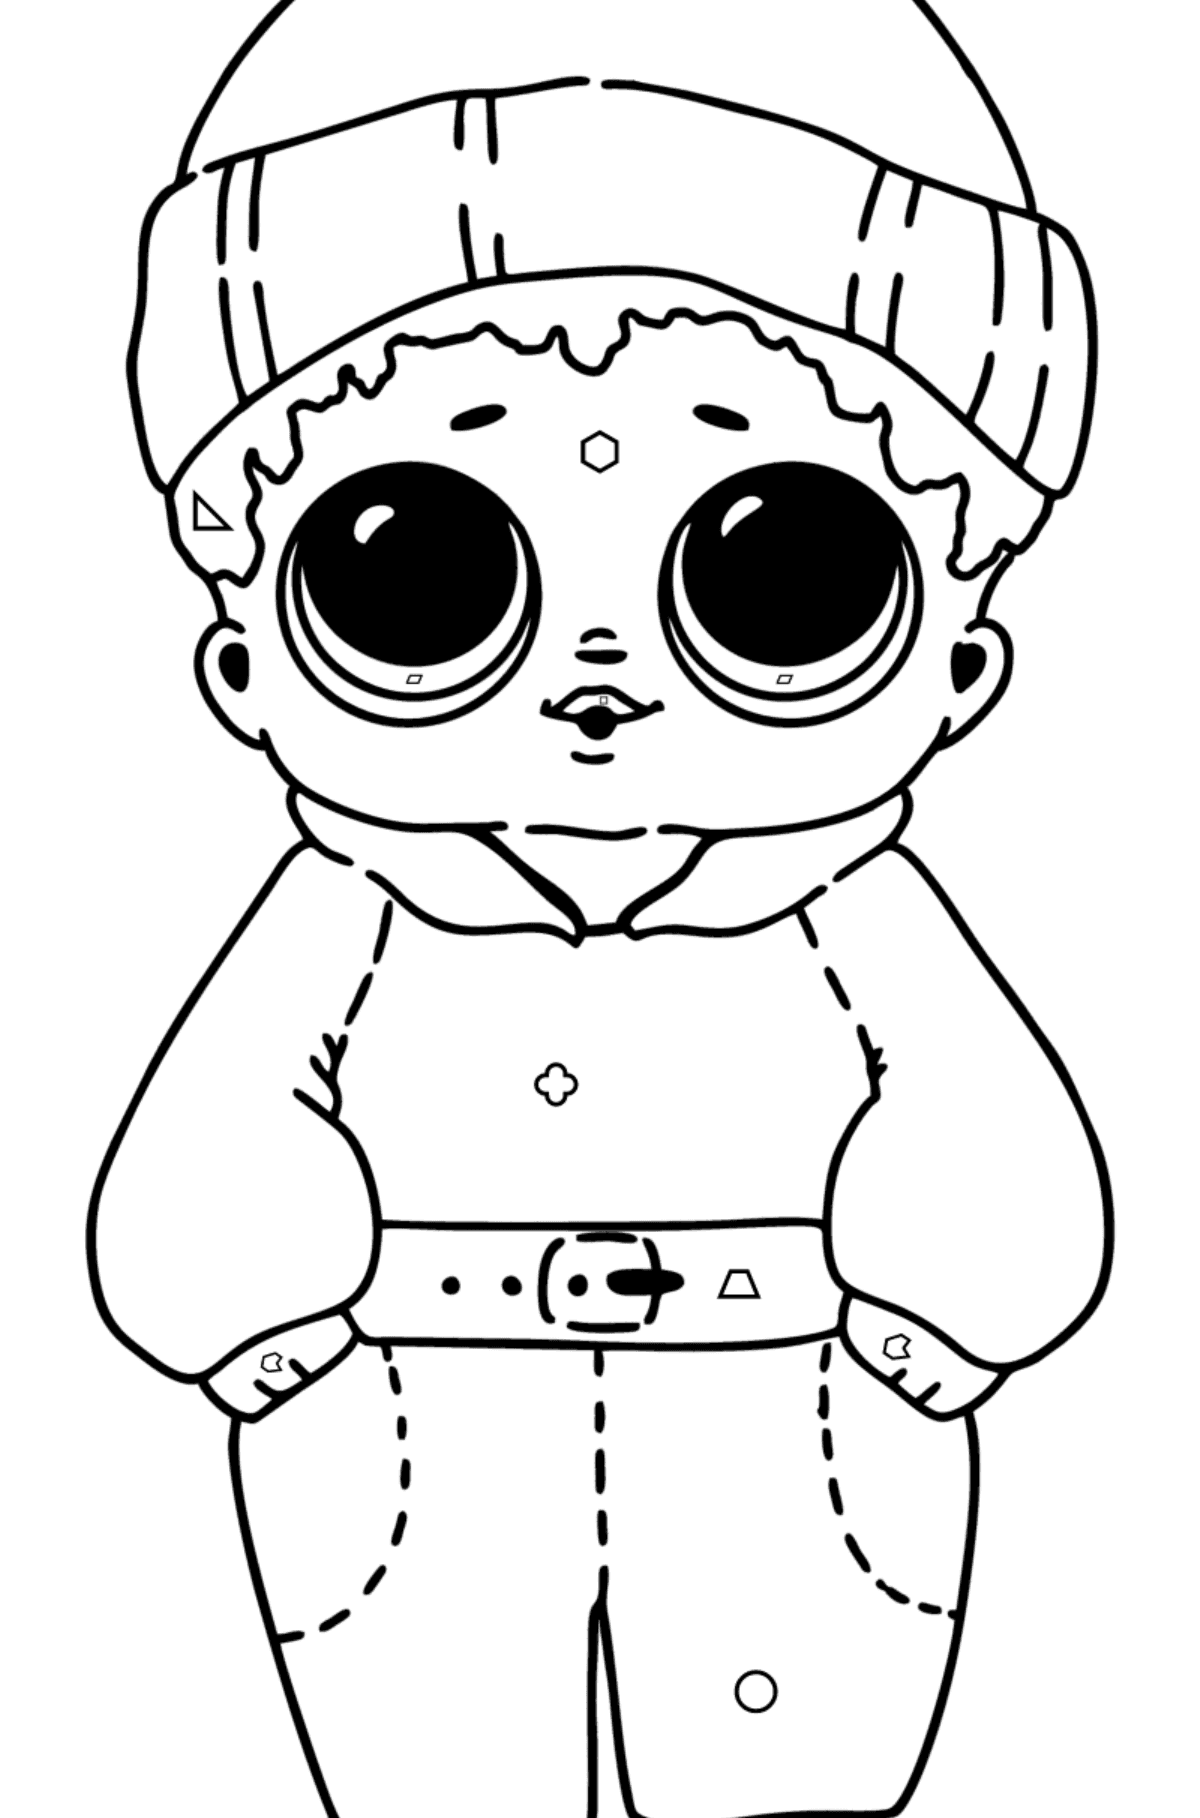 Coloring page LOL boy Sunny - Coloring by Geometric Shapes for Kids